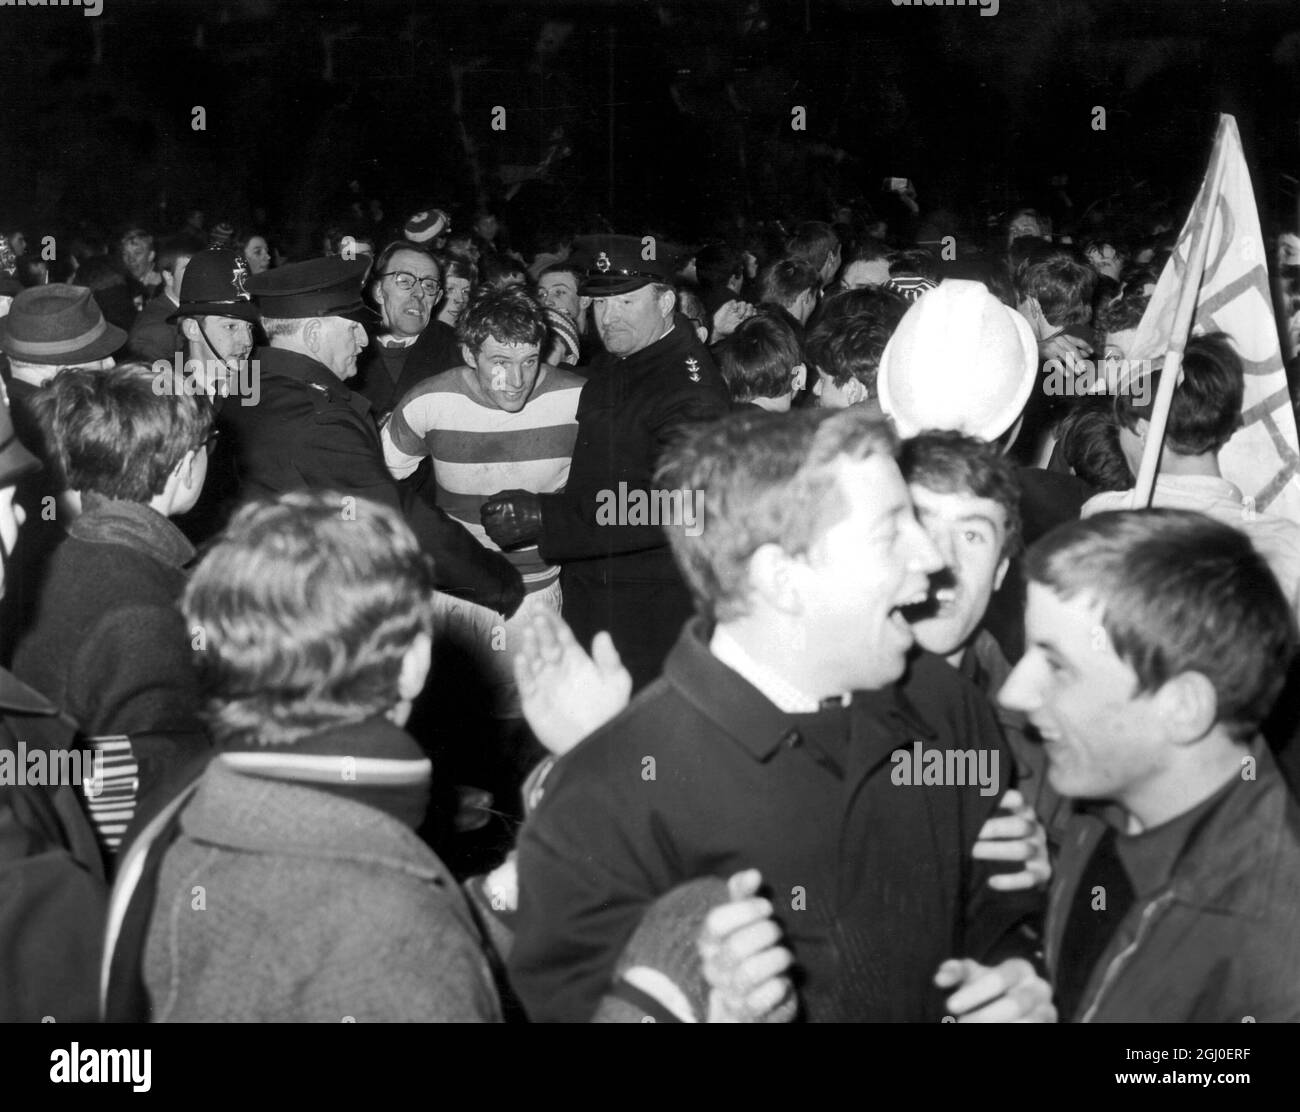 Rodney Marsh is escorted off the field by police, as fans try to mob him after the match between QPR and Birmingham City. Rangers won the game 3-1 (7-2) on aggregate sending them into the League Cup final at Wembley. 7th February 1967. Stock Photo